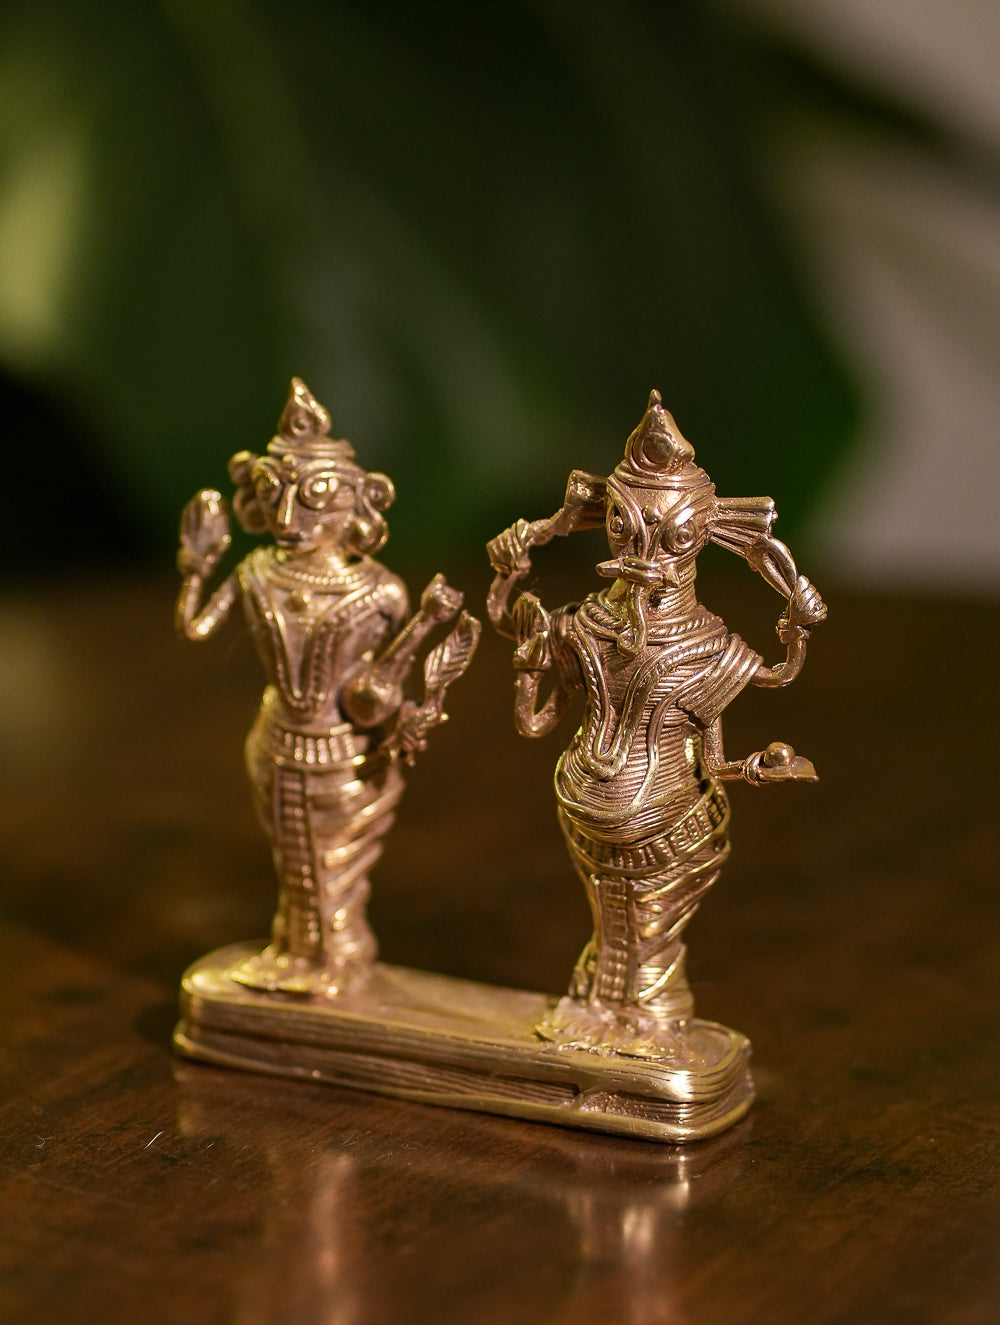 Load image into Gallery viewer, Dhokra Craft Curio - Lakshmi-Ganesh